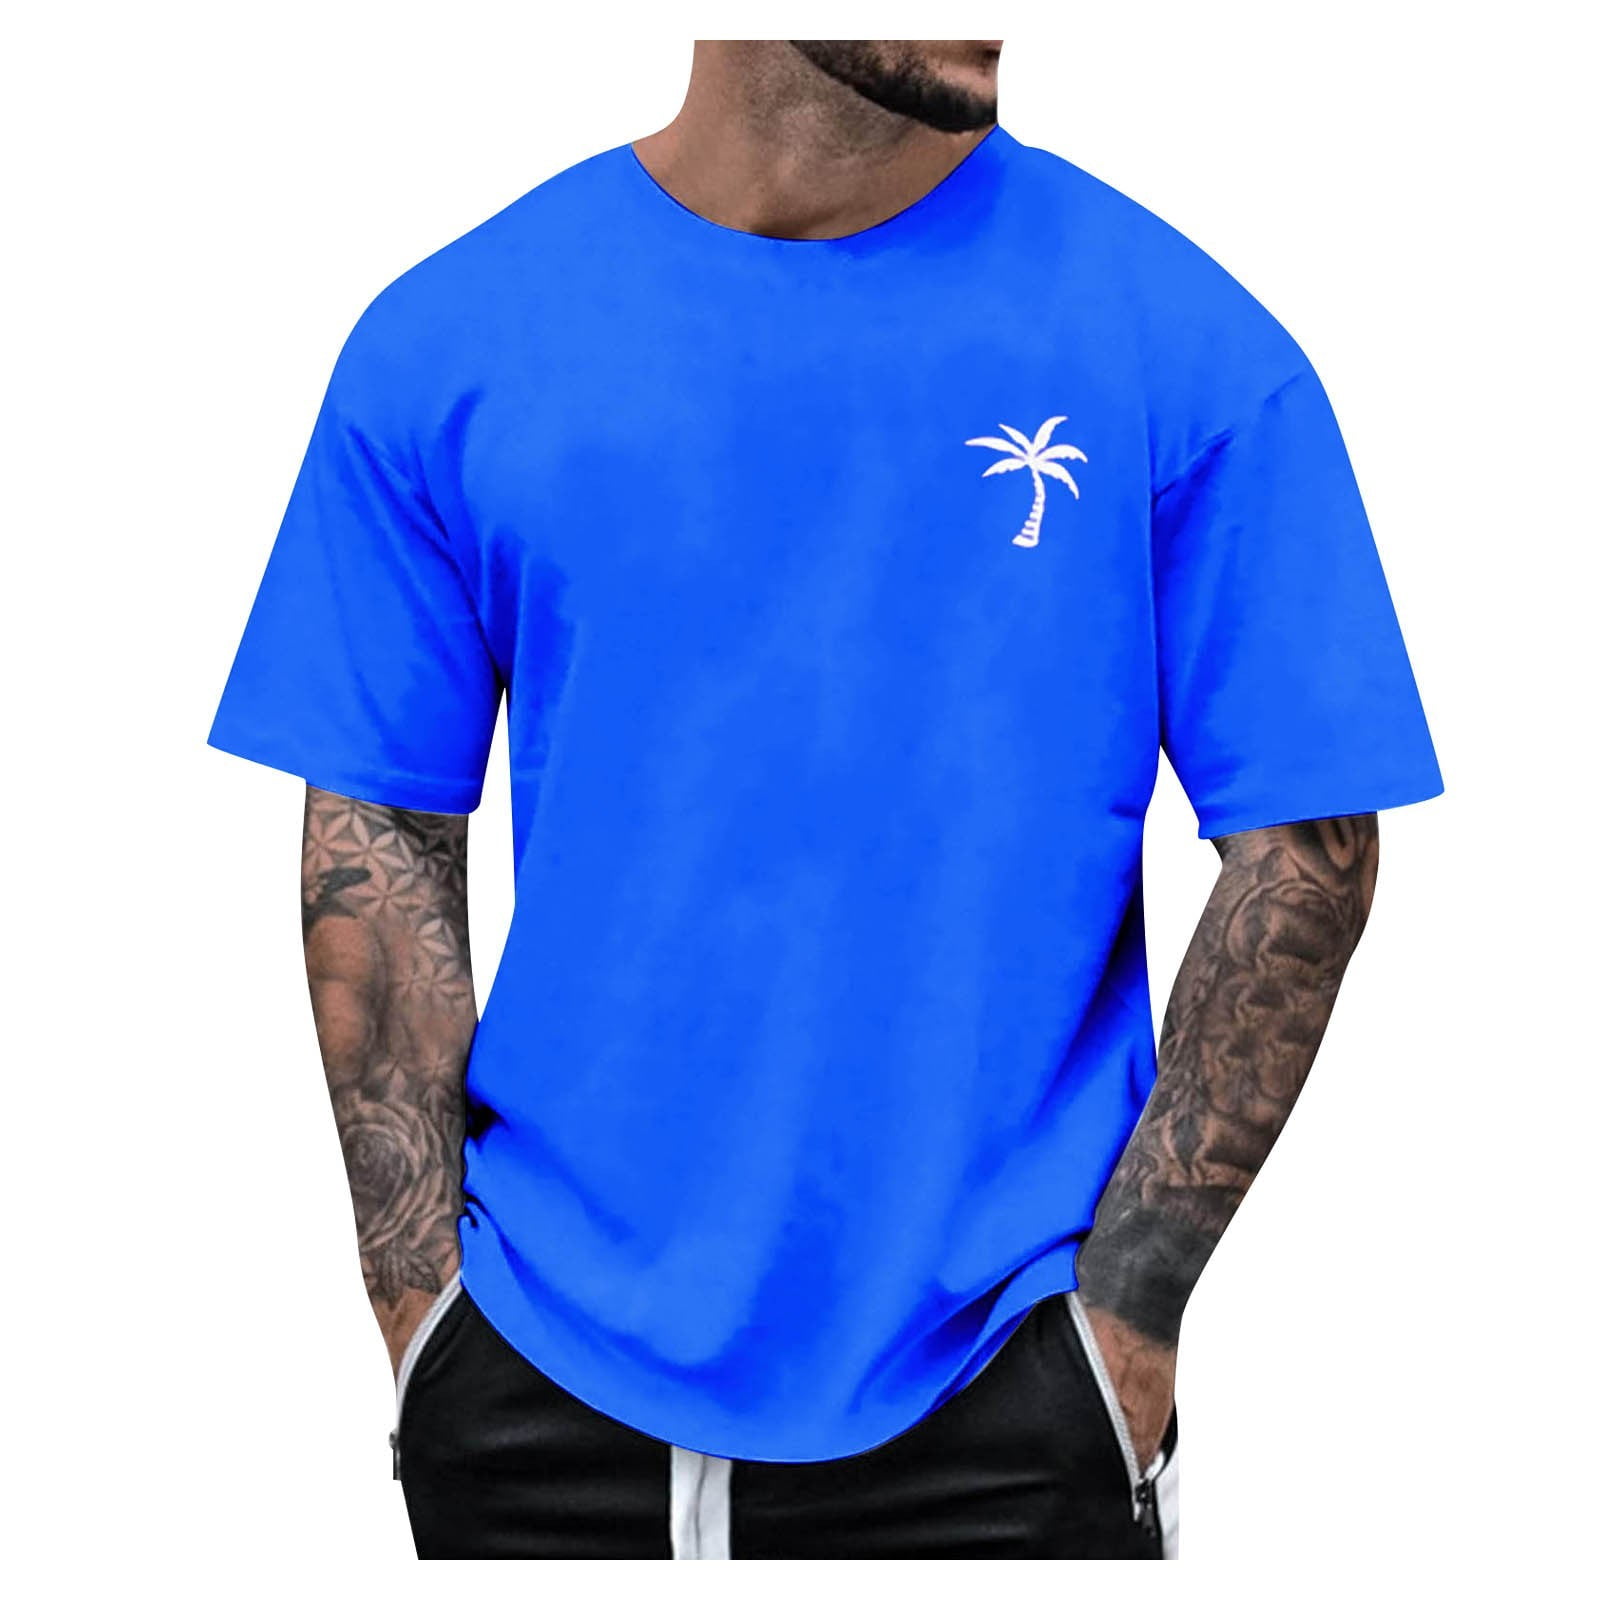 Qcmgmg Classic Tees for Men Loose Crew Neck Men's Athletic Shirts ...